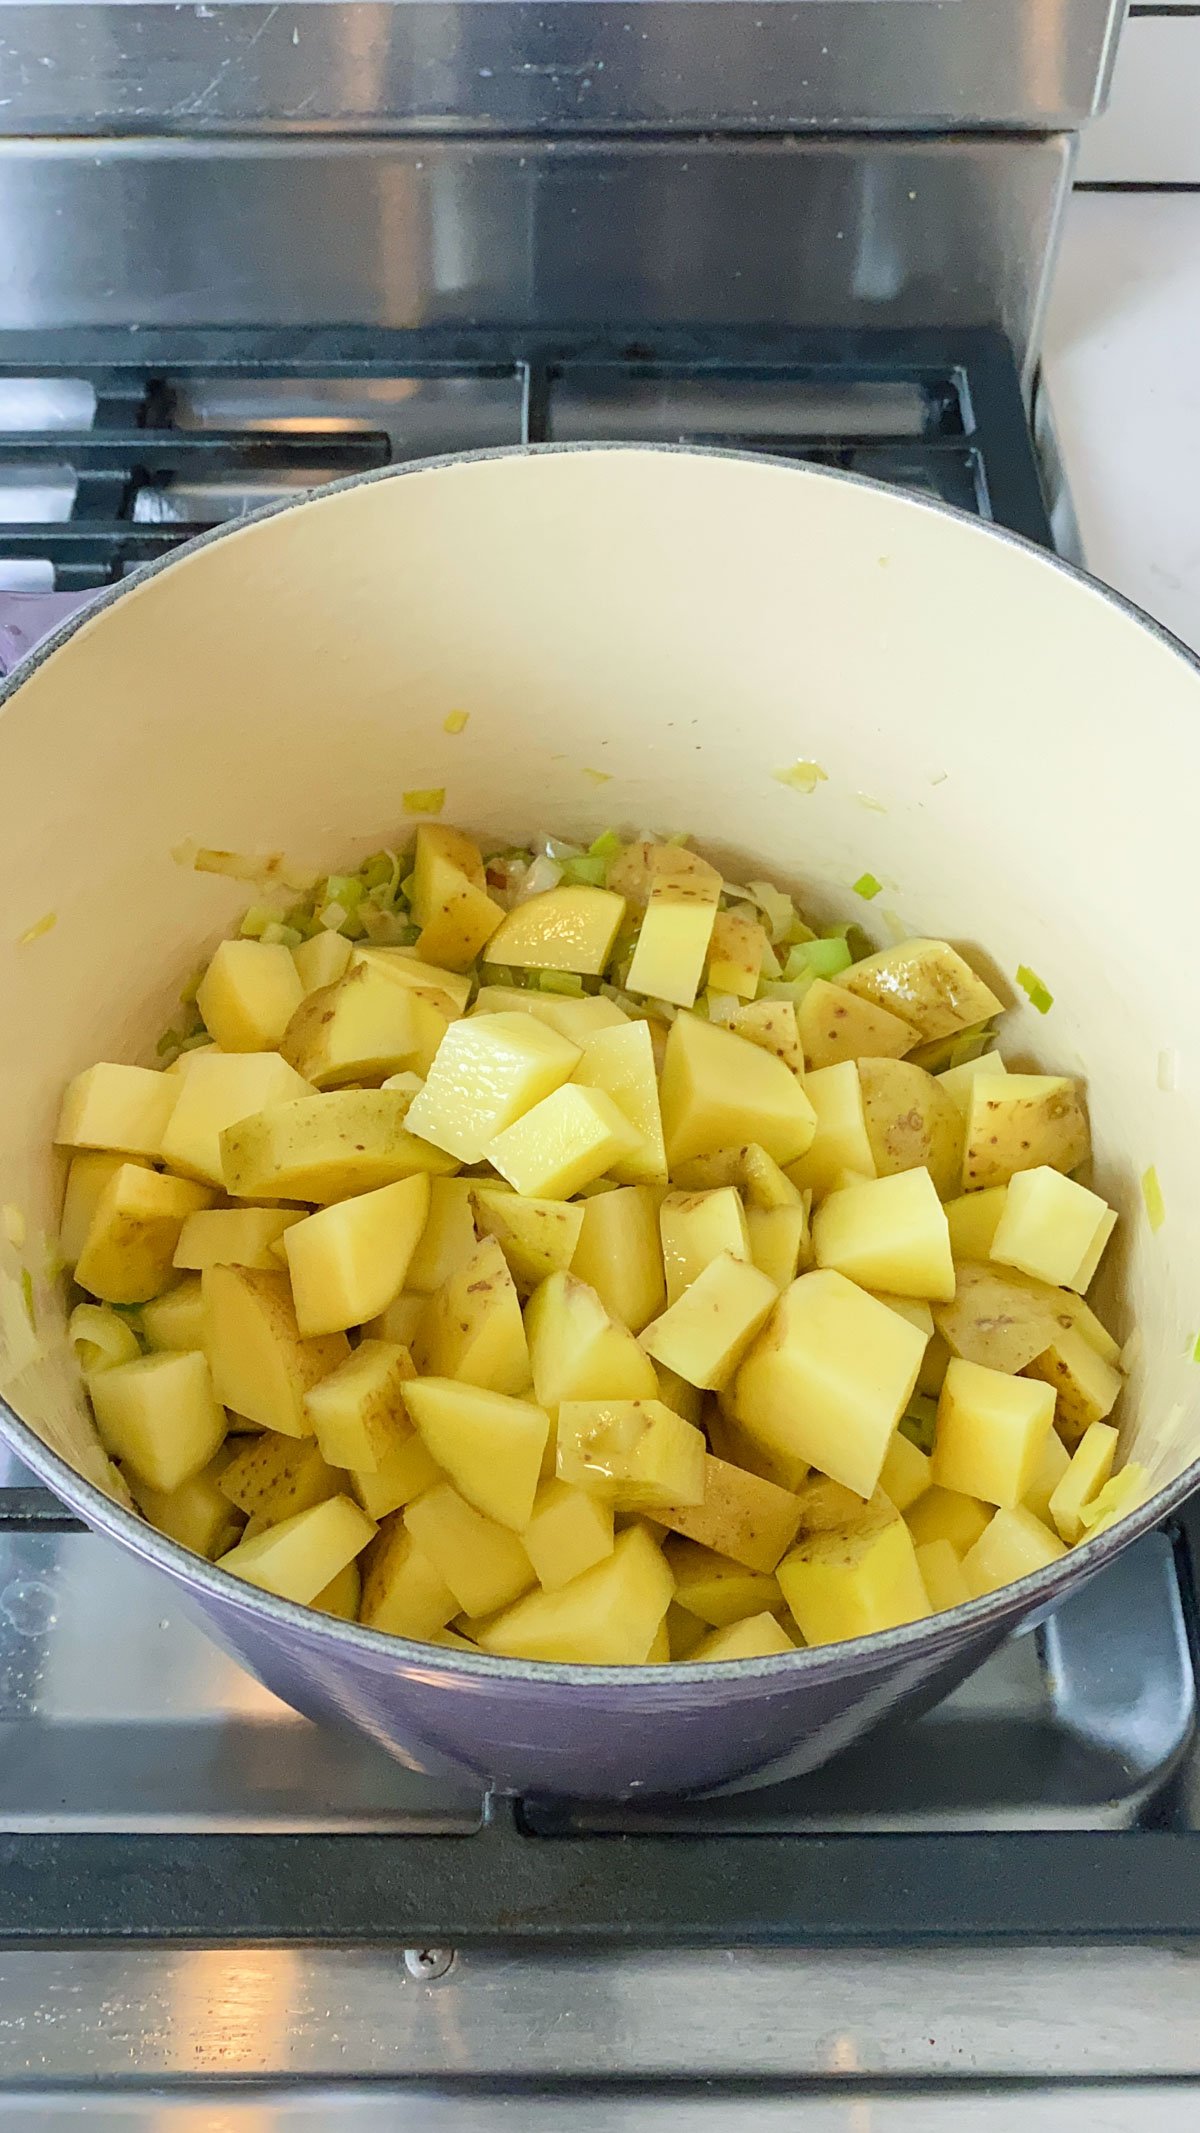 Add the cubed potatoes to the leeks.